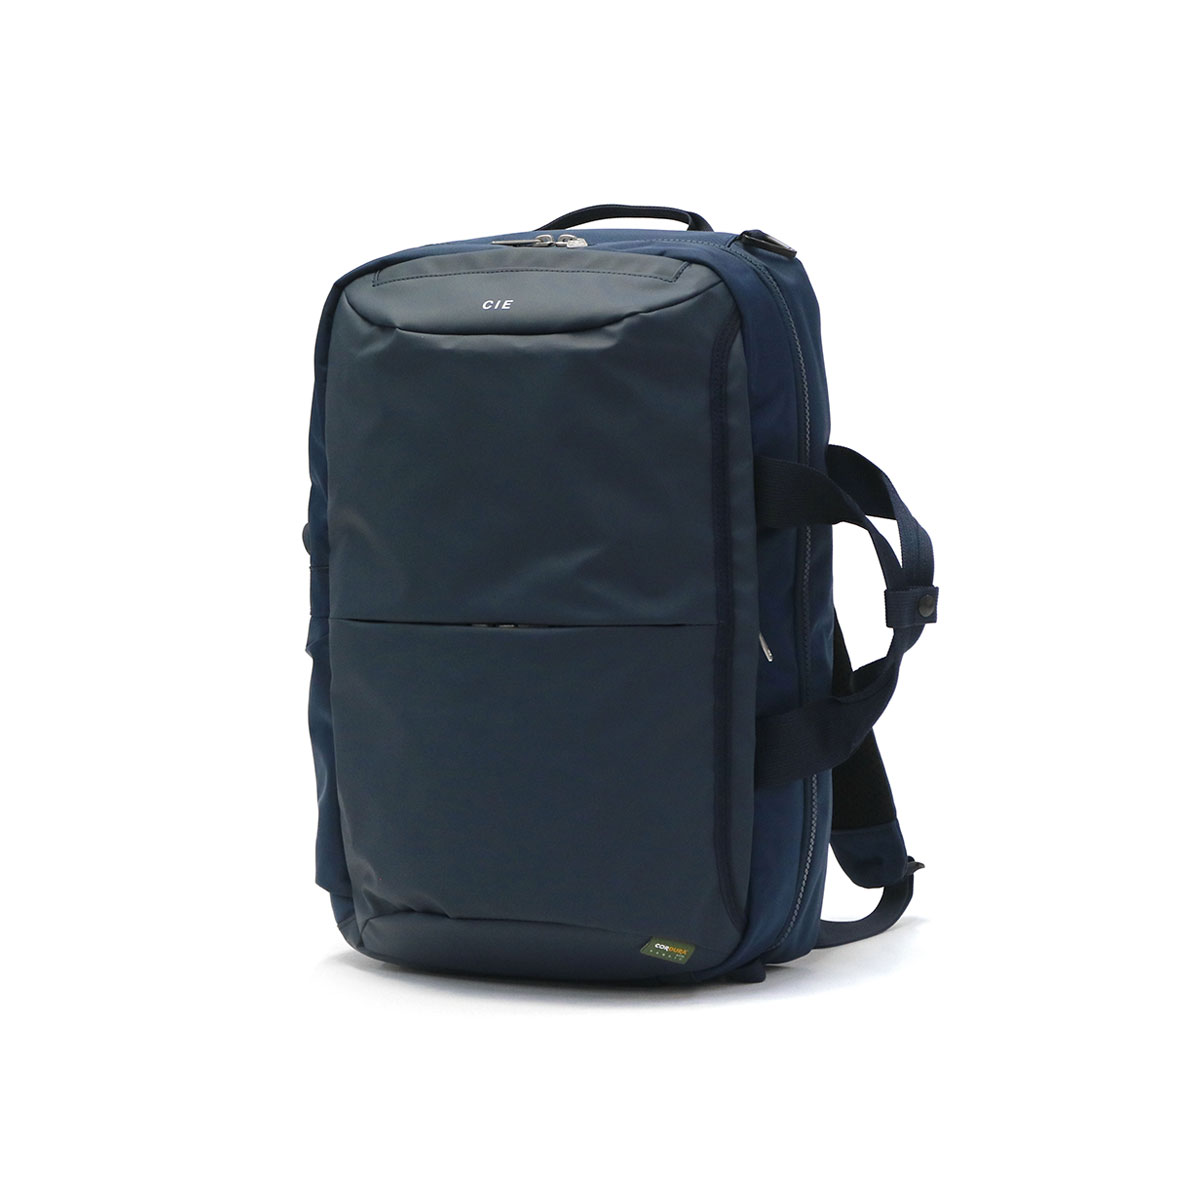 CIE リュック シー LEAP 2WAY BACKPACK-S 軽量 防水 耐久 B4 A4 PC...